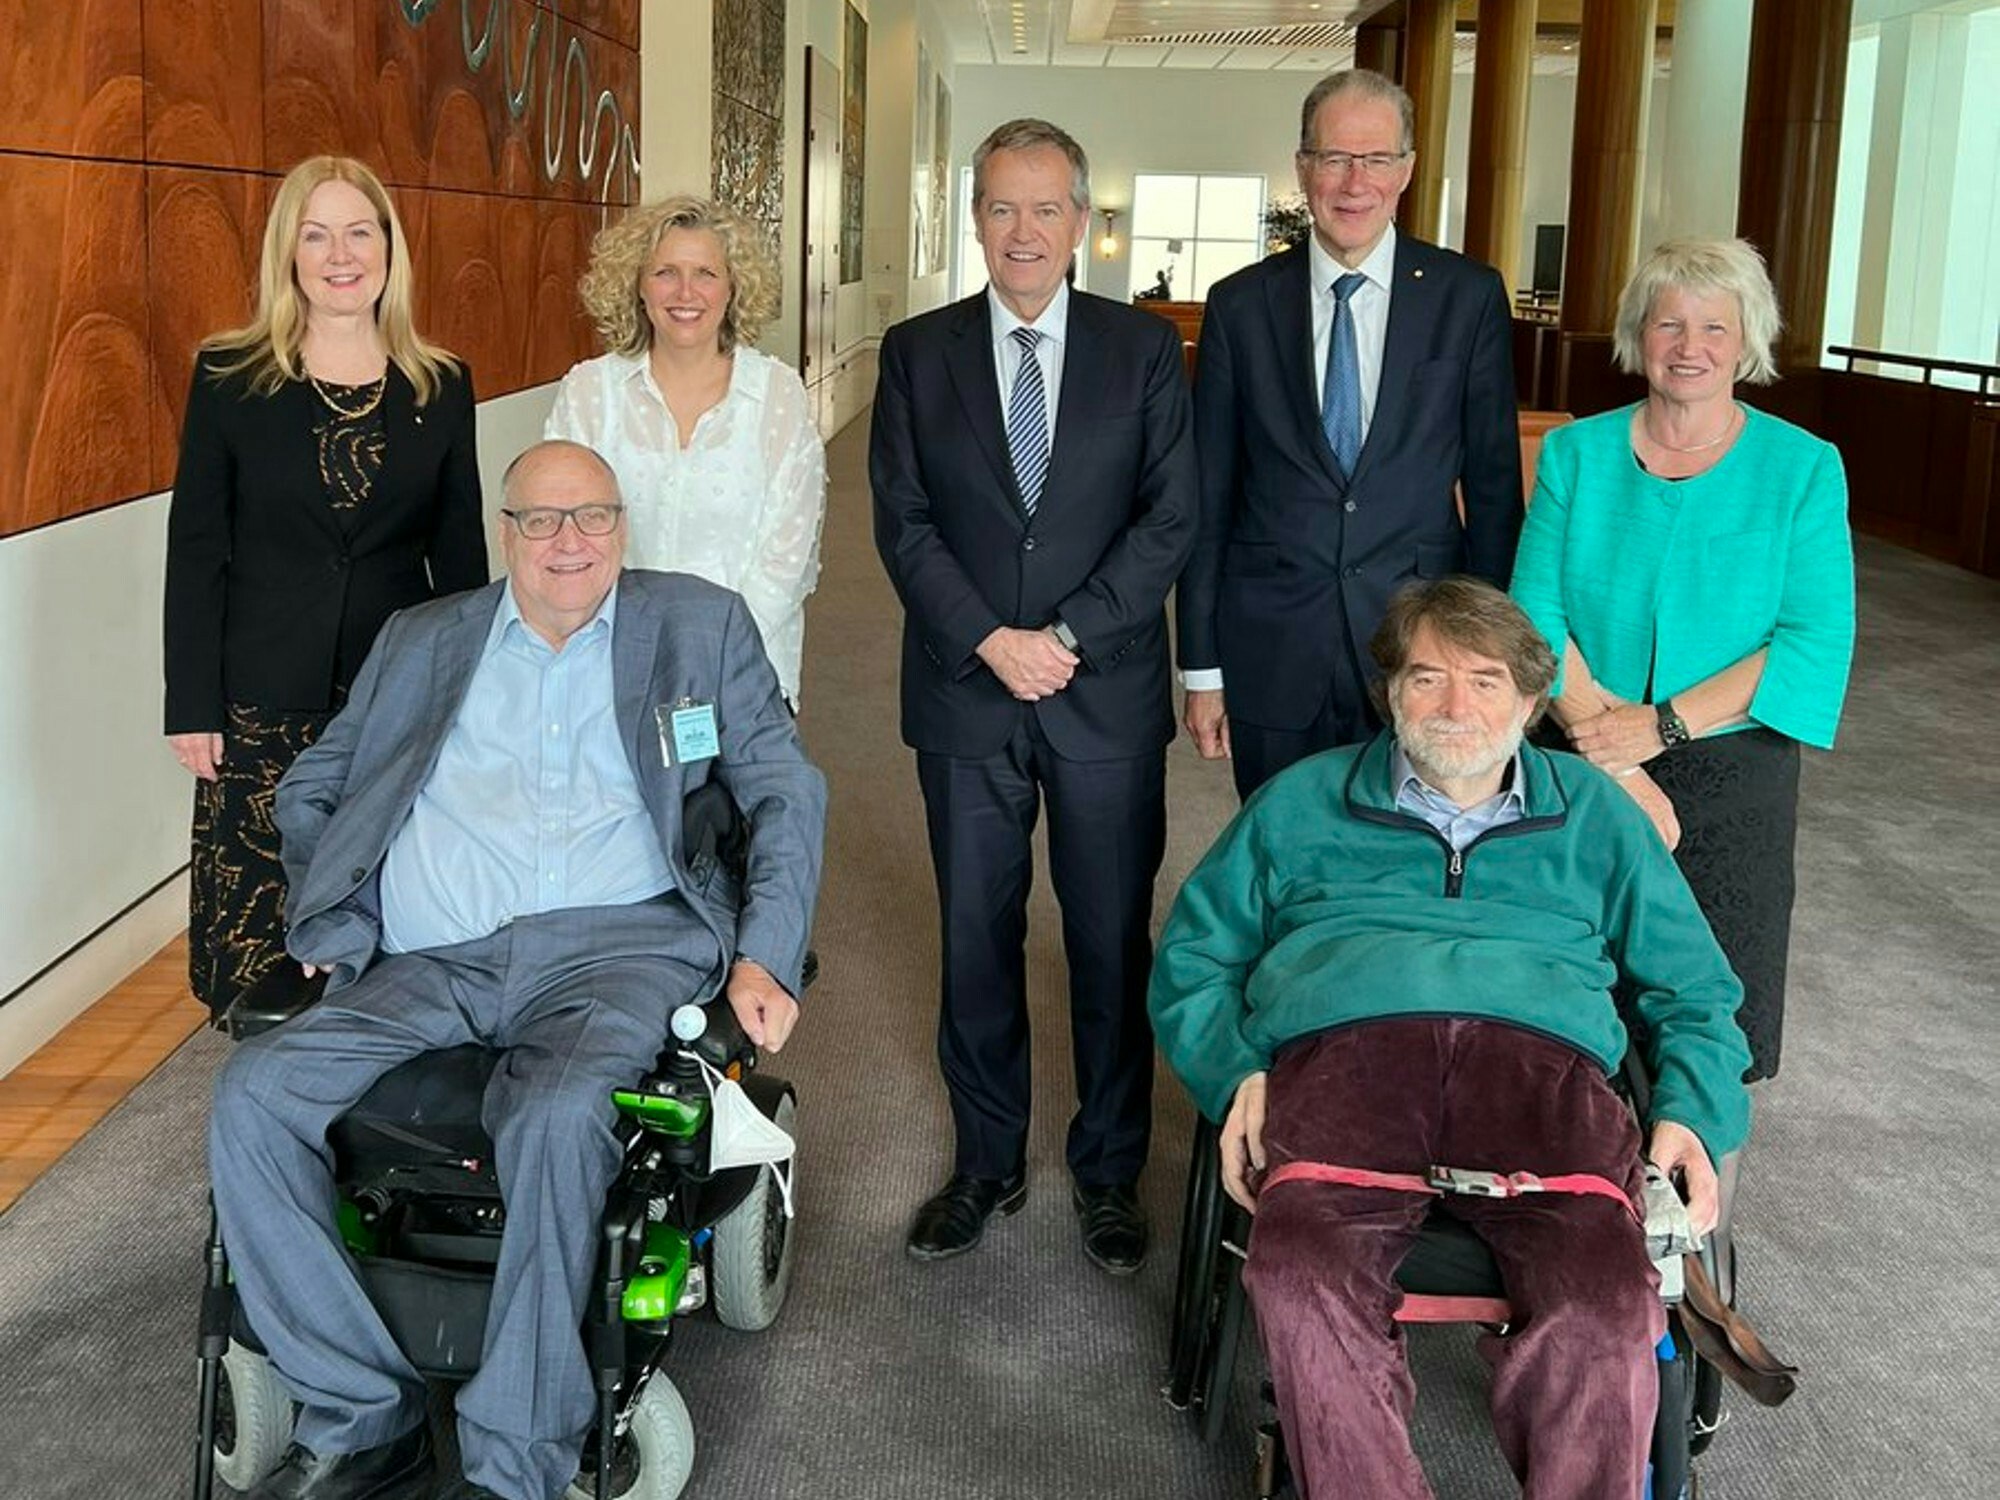 NDIS Minister Bill Shorten has named Professor Bruce Bonyhady AM and Ms Lisa Paul AO PSM as co-chairs of the new review panel. [Source: Twitter]
